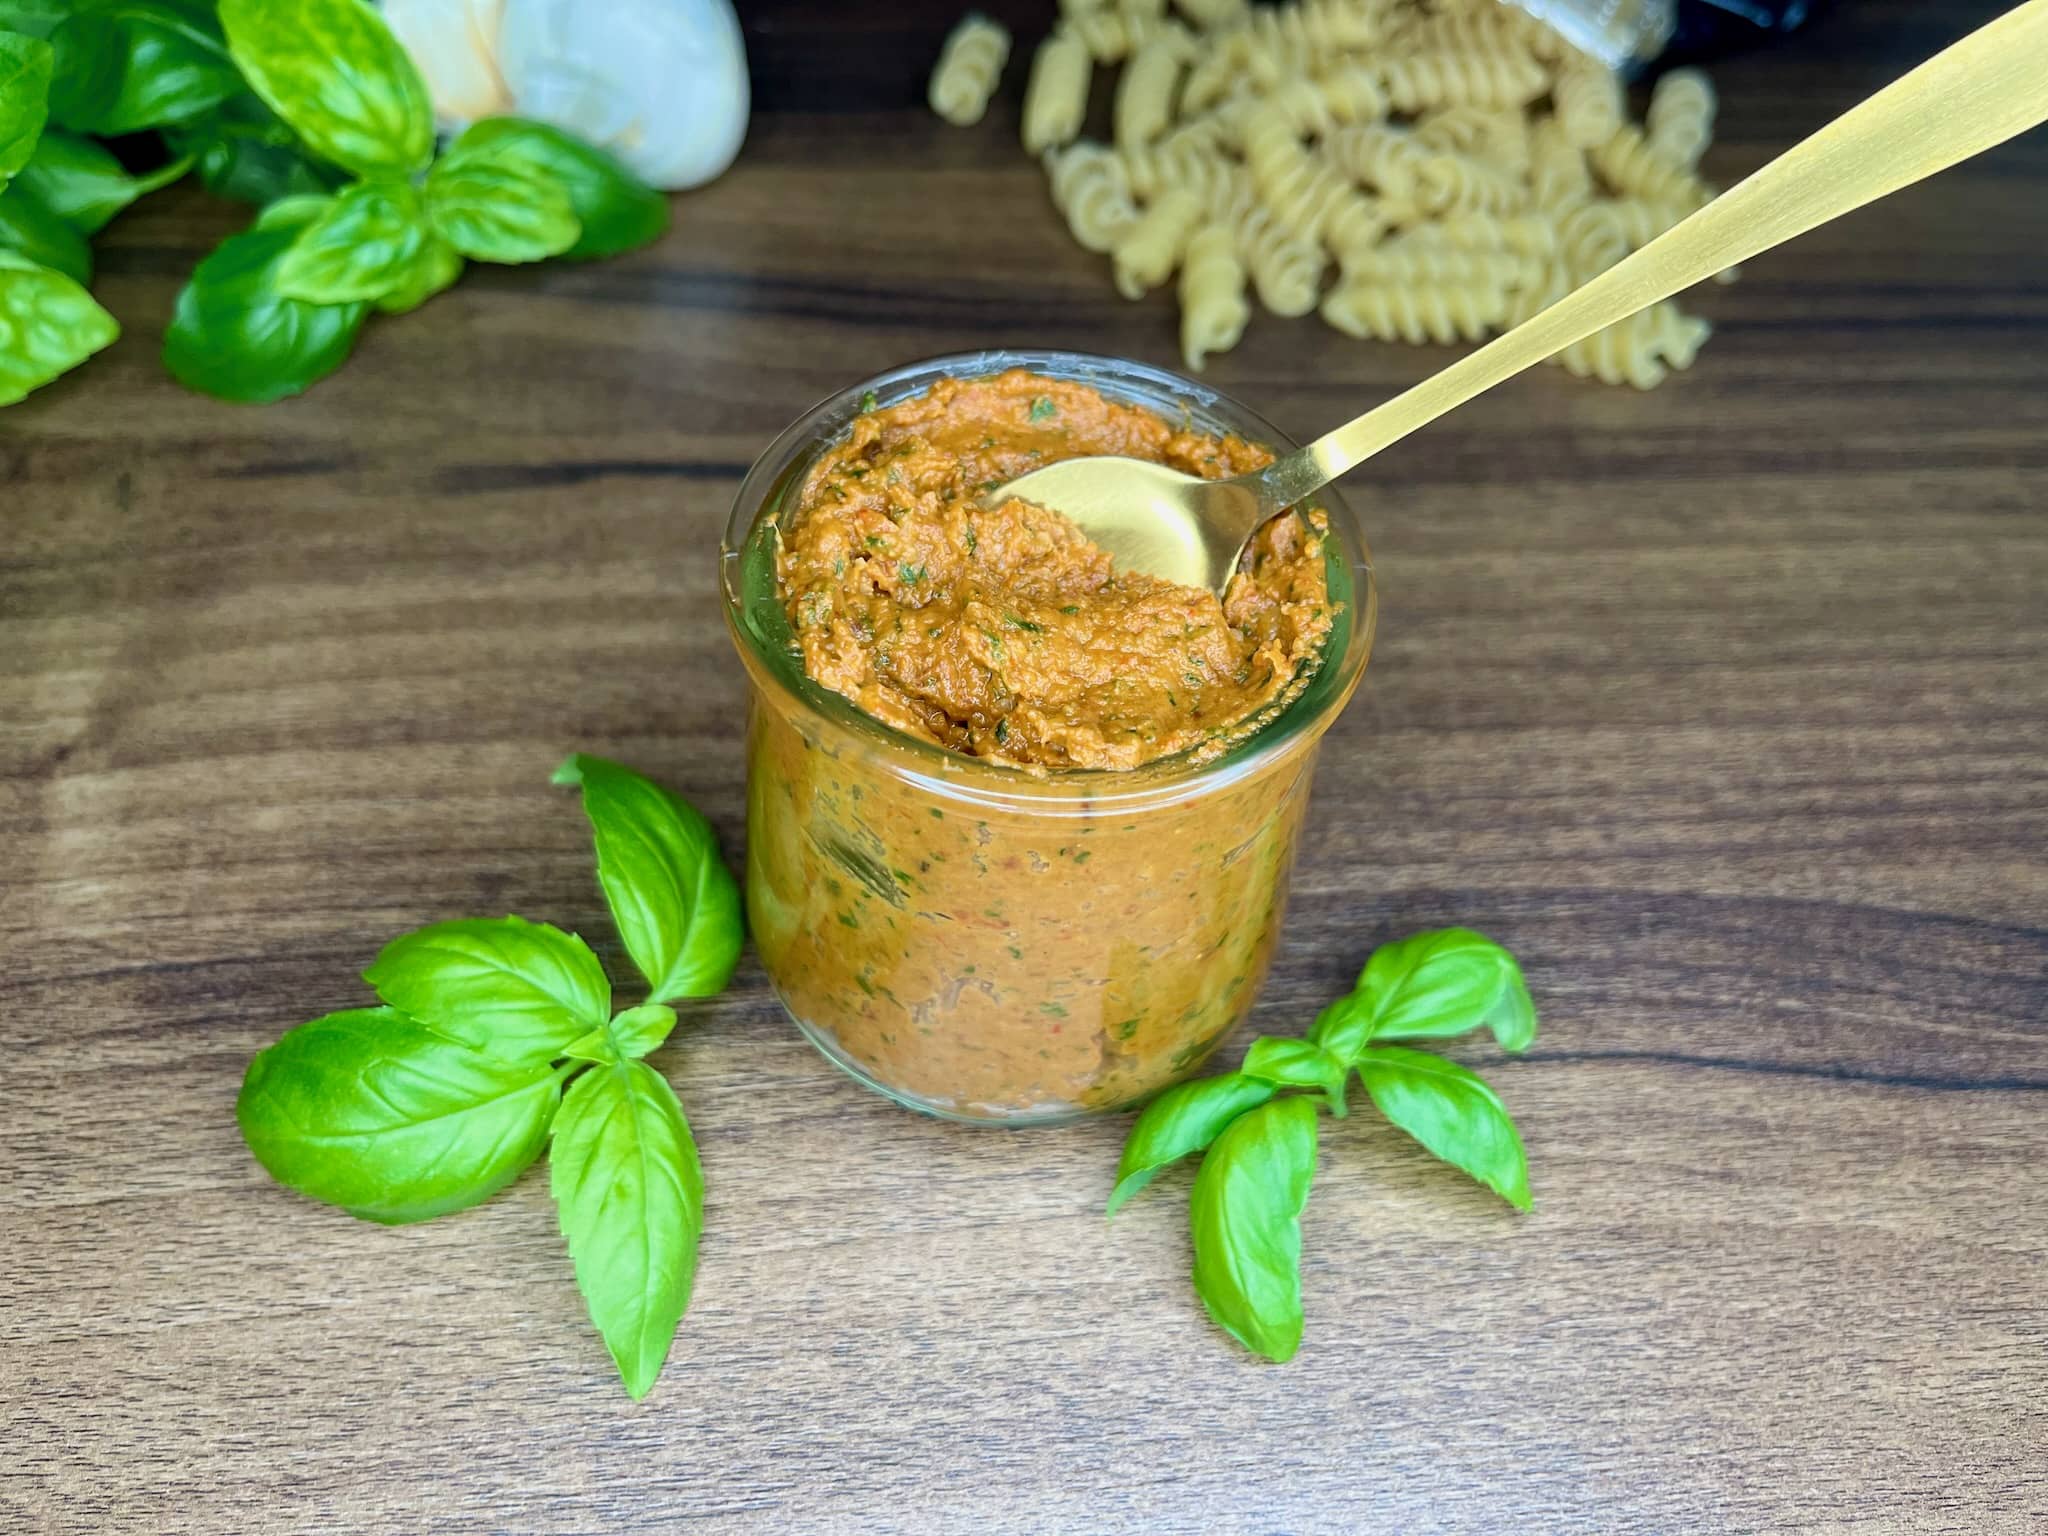 Red pesto in a jug, with basil leaves on the side